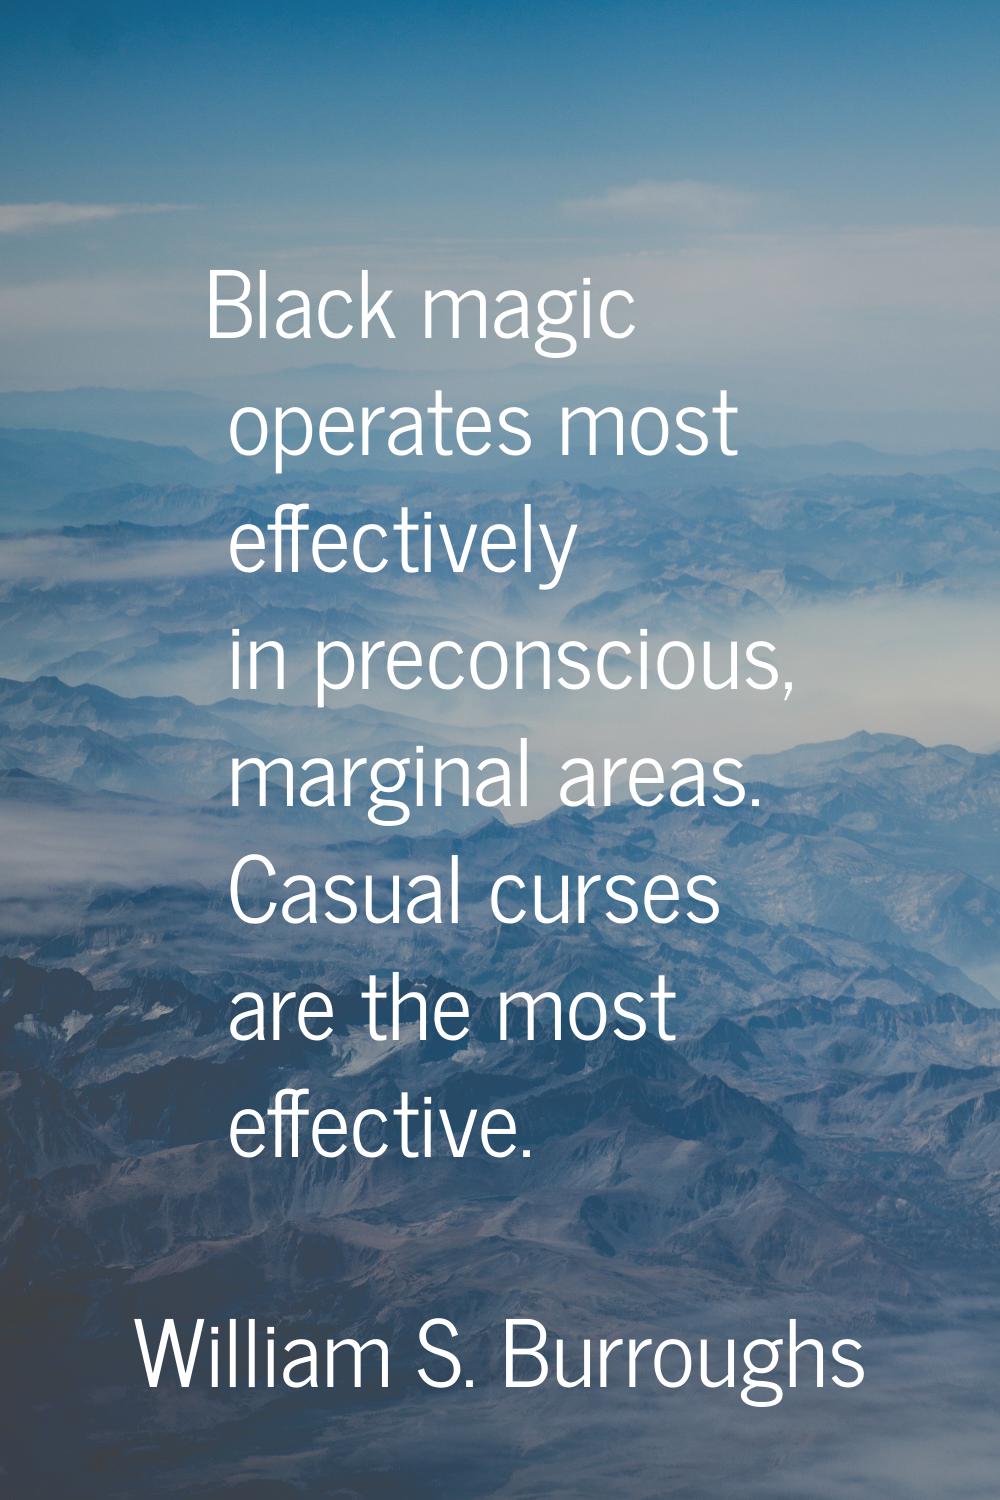 Black magic operates most effectively in preconscious, marginal areas. Casual curses are the most e